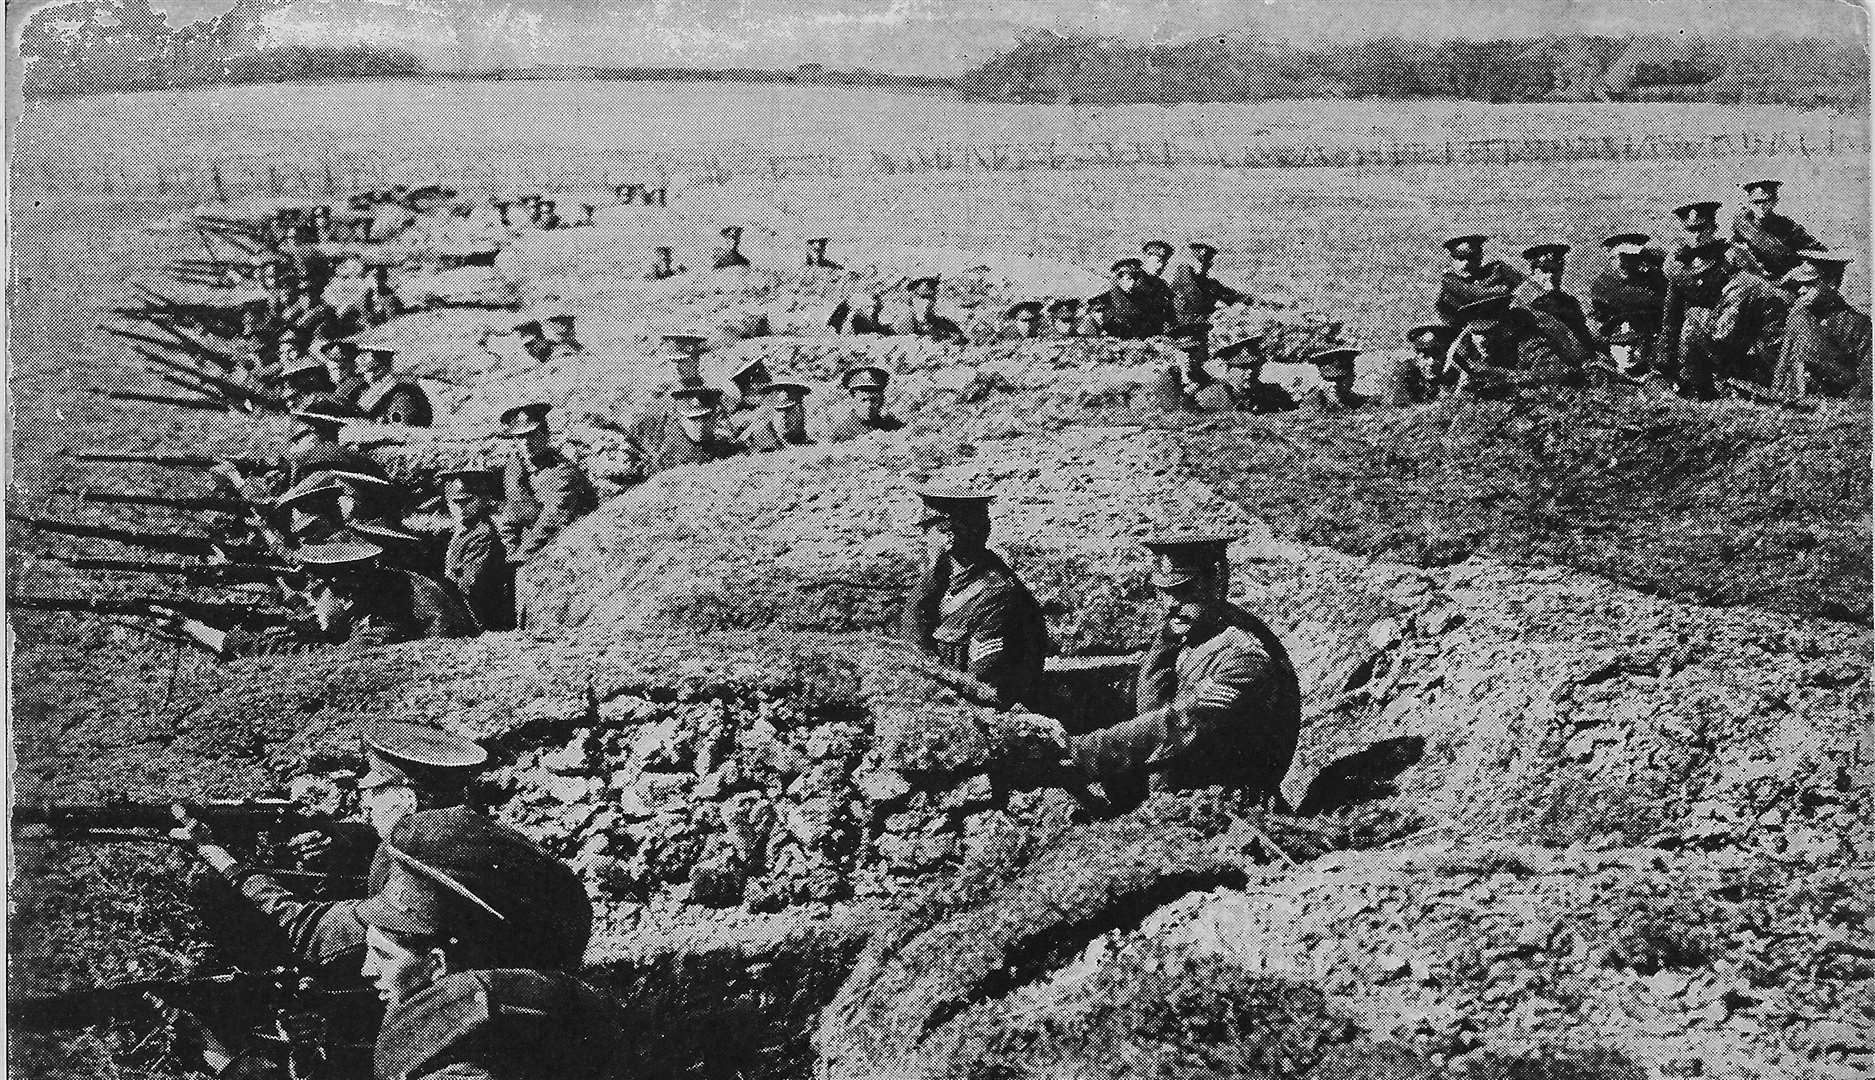 First World War trenches as they existed before the white flag deception.Paul Kendall